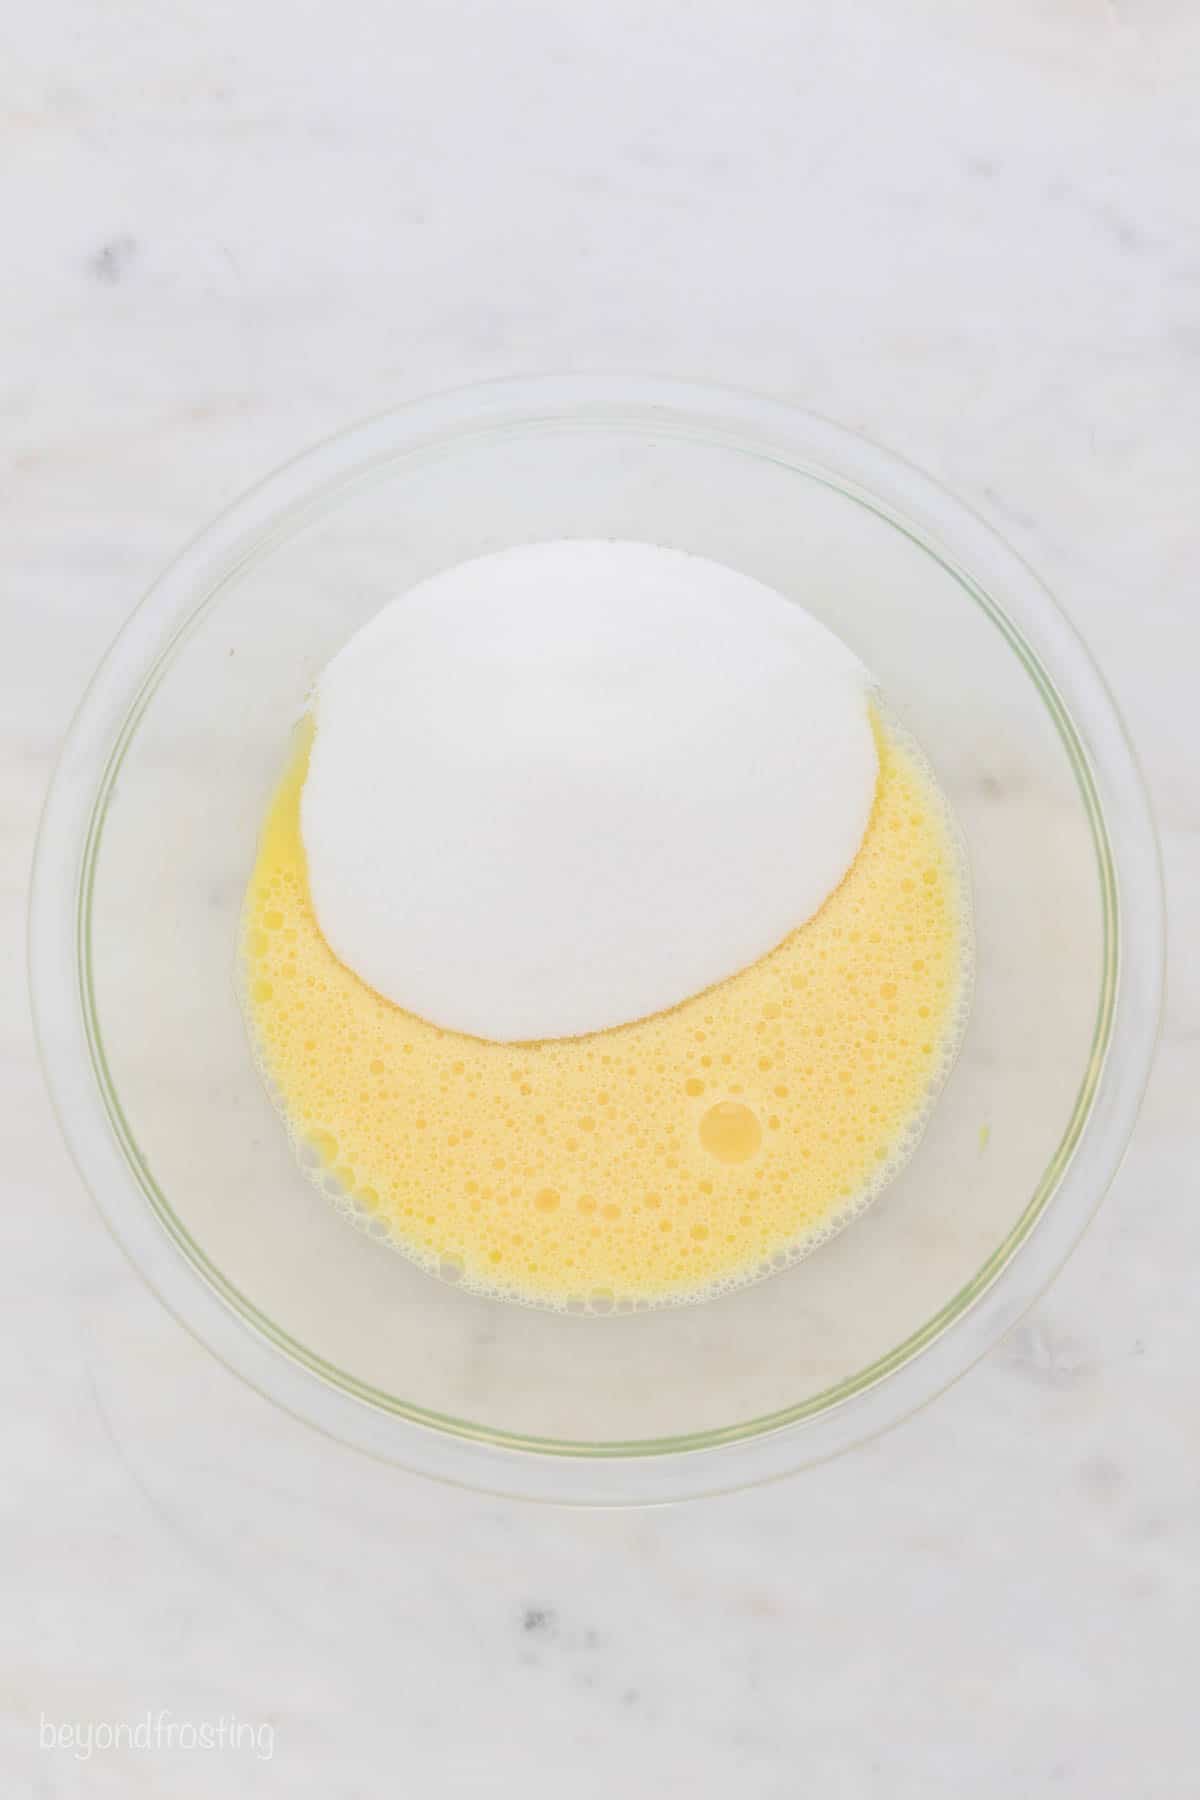 A glass bowl with whipped eggs and sugar